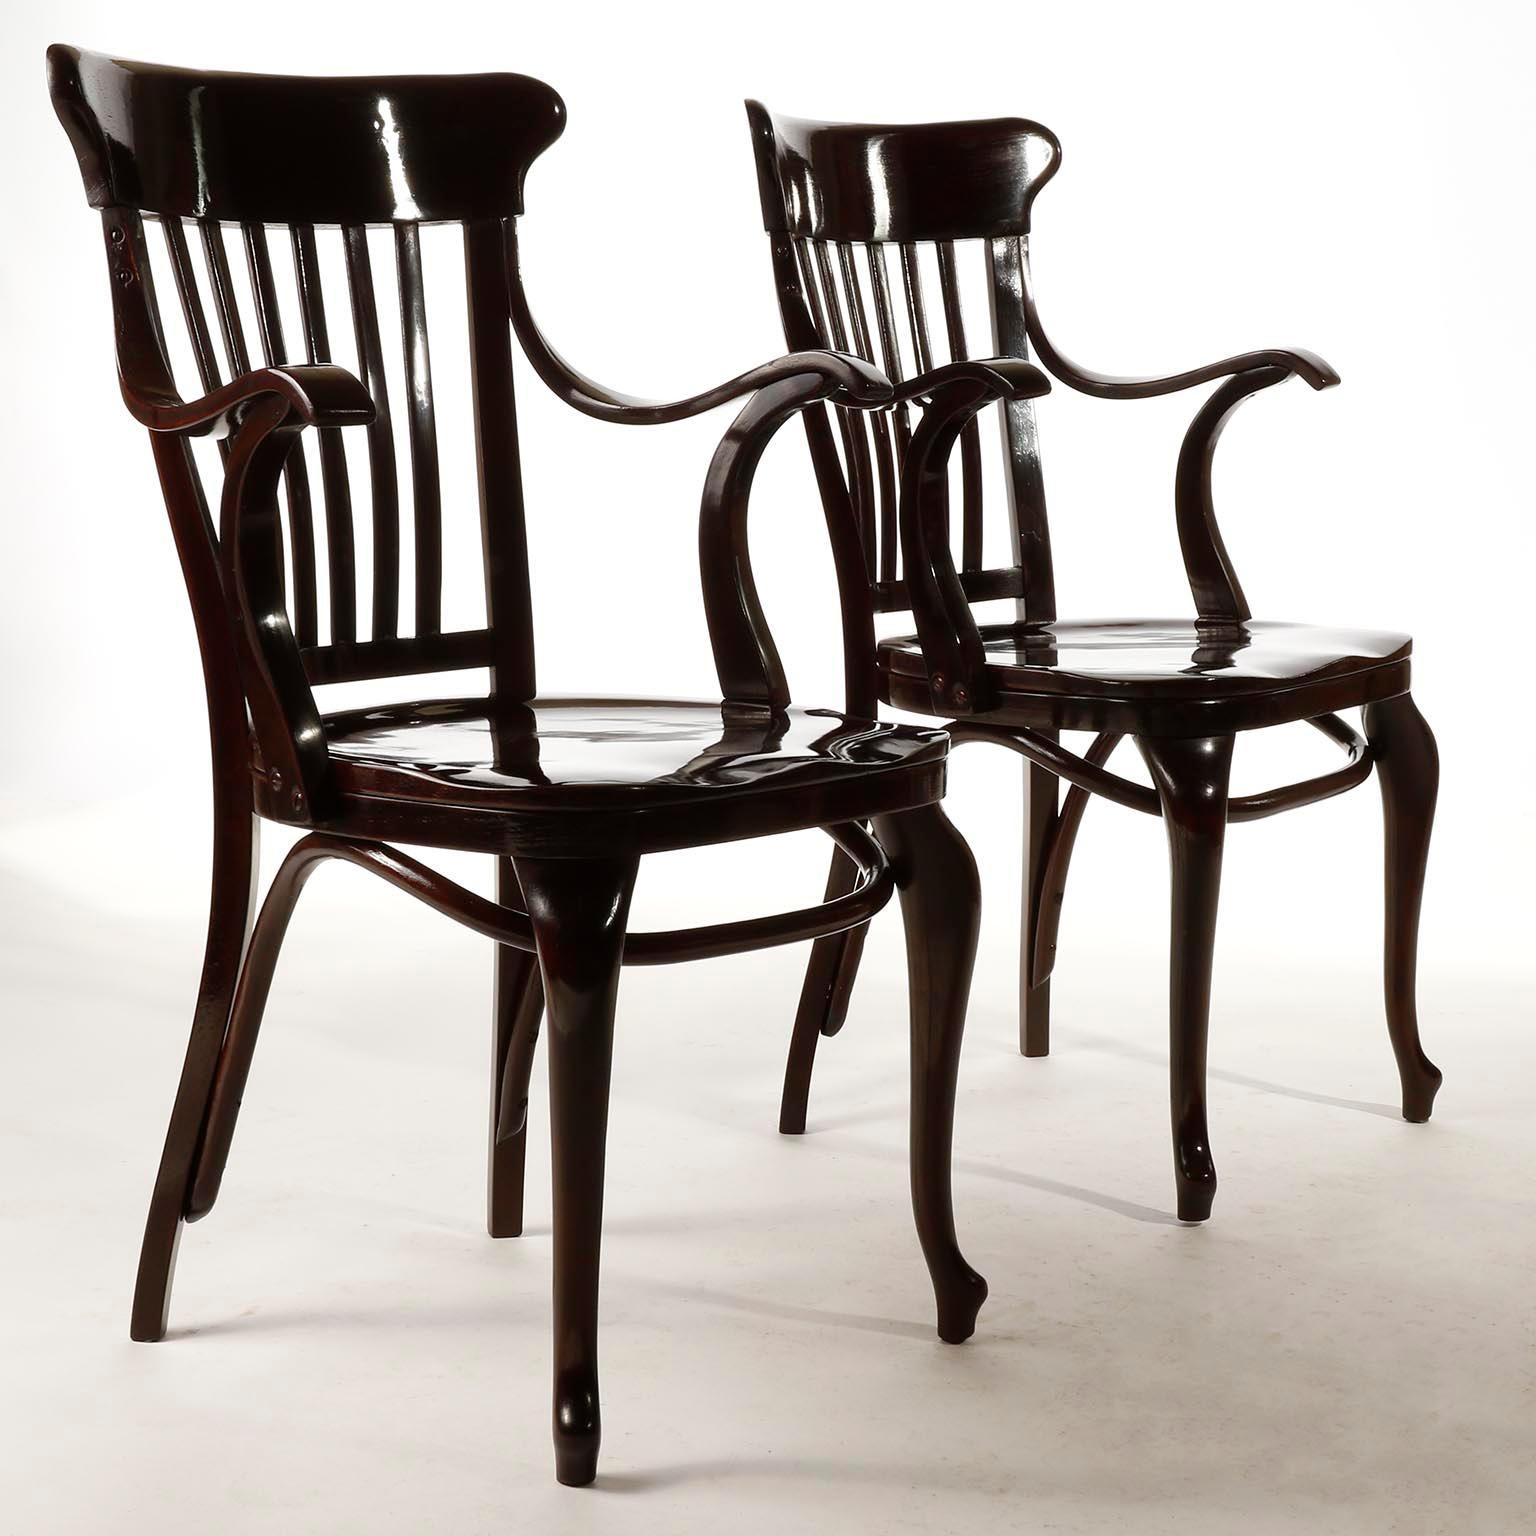 A pair of fantastic and extremely rare Adolf Loos armchairs manufactured by Thonet.
Adolf Loos adopted this chair model inspired by 18th century Windsor chairs and used it for the Cafe Capua which interior was designed by him in 1913.
The Cafe Capua